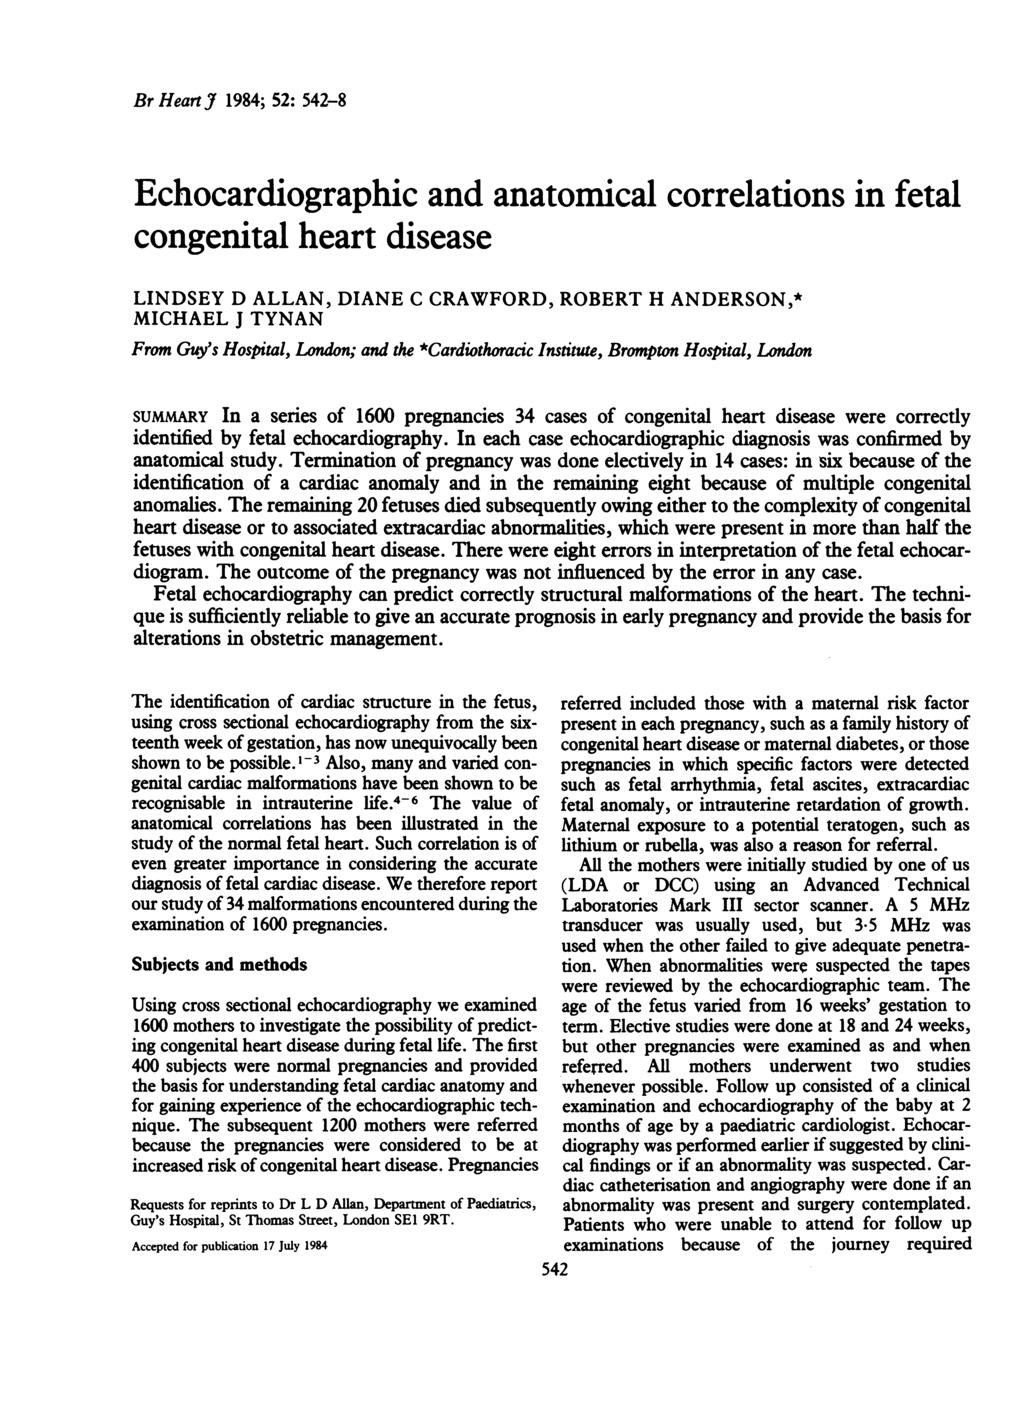 Br Heart J 1984; 52: 542-8 Echocardiographic and anatomical correlations in fetal congenital heart disease LINDSEY D ALLAN, DIANE C CRAWFORD, ROBERT H ANDERSON,* MICHAEL J TYNAN From Guy's Hospital,